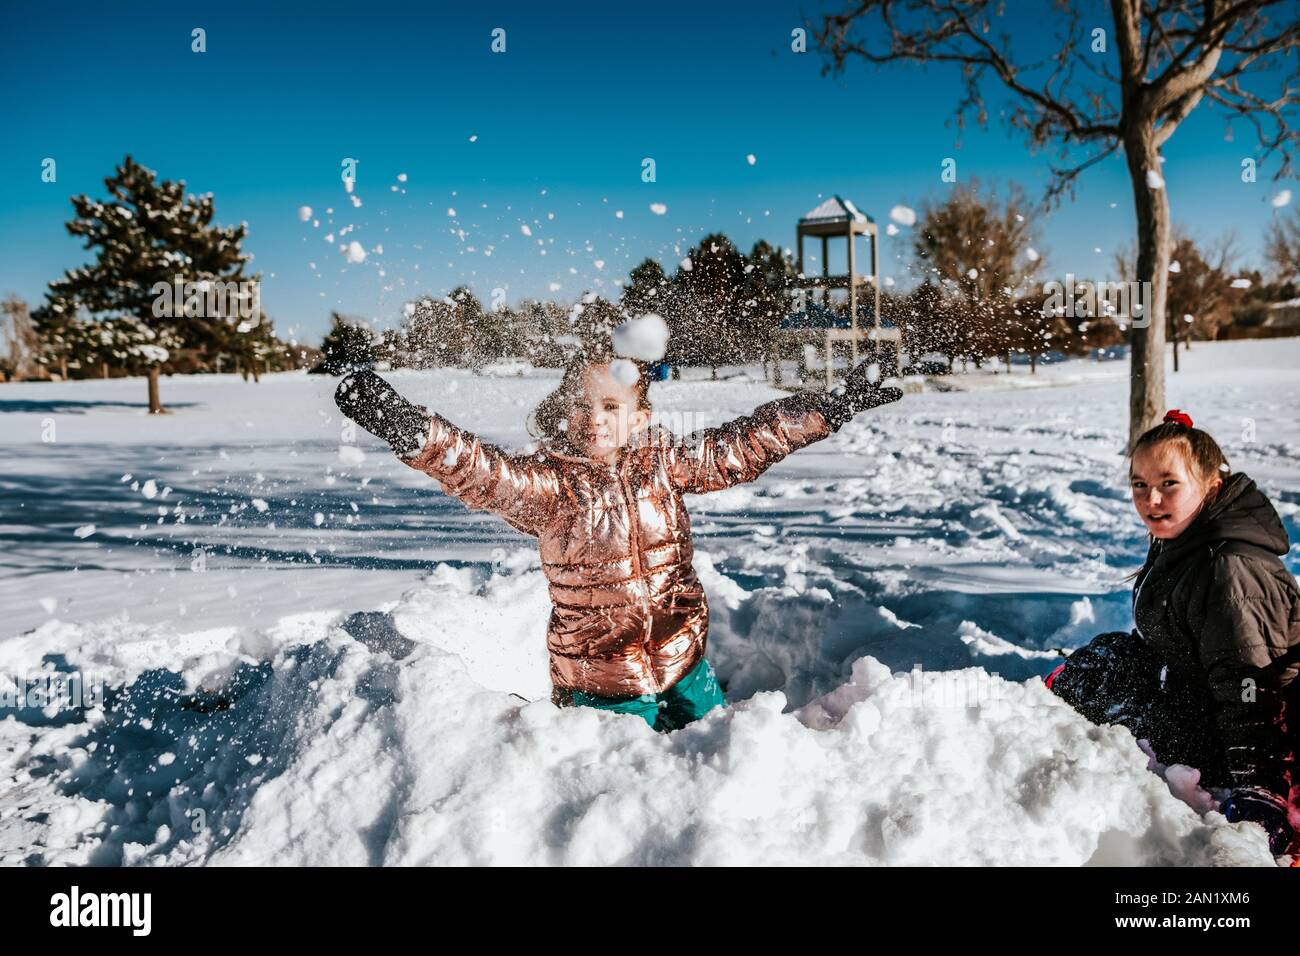 action shot of young girl throwing a snowball during winter Stock Photo